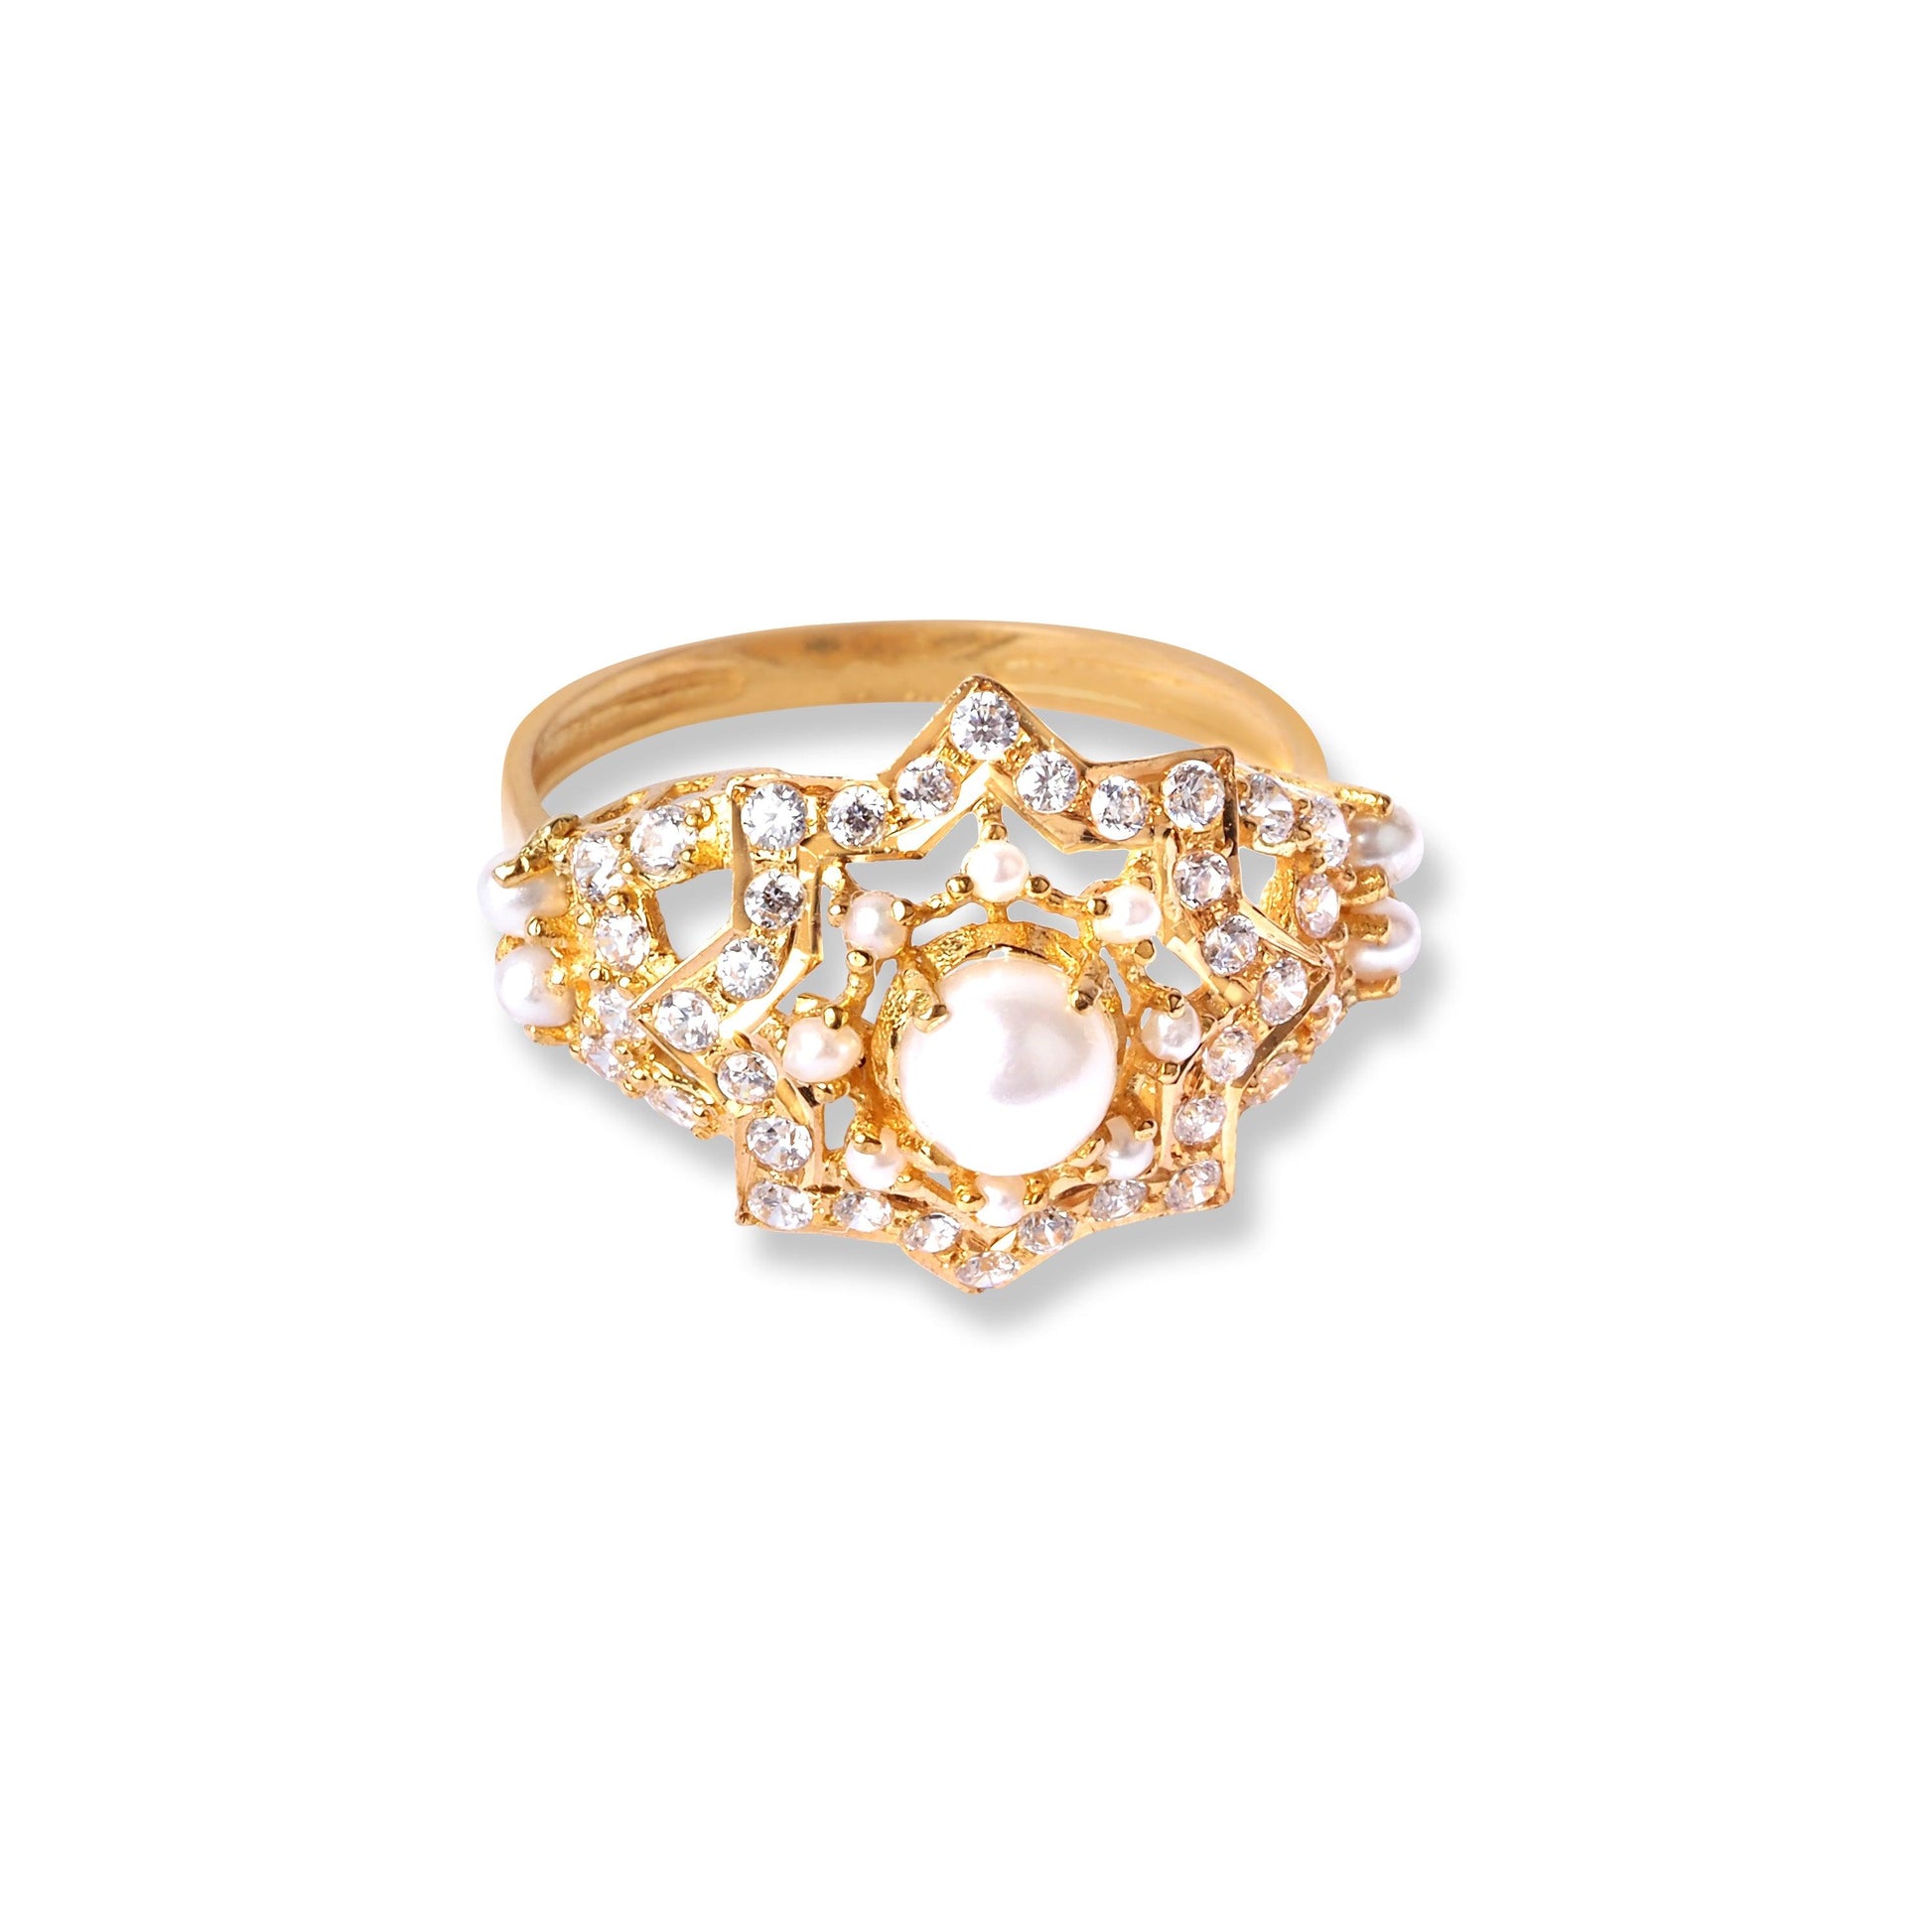 22ct Yellow Gold Ring With Cultured Pearls & Cubic Zirconia Stones (3.7g) LR-16581 - Minar Jewellers